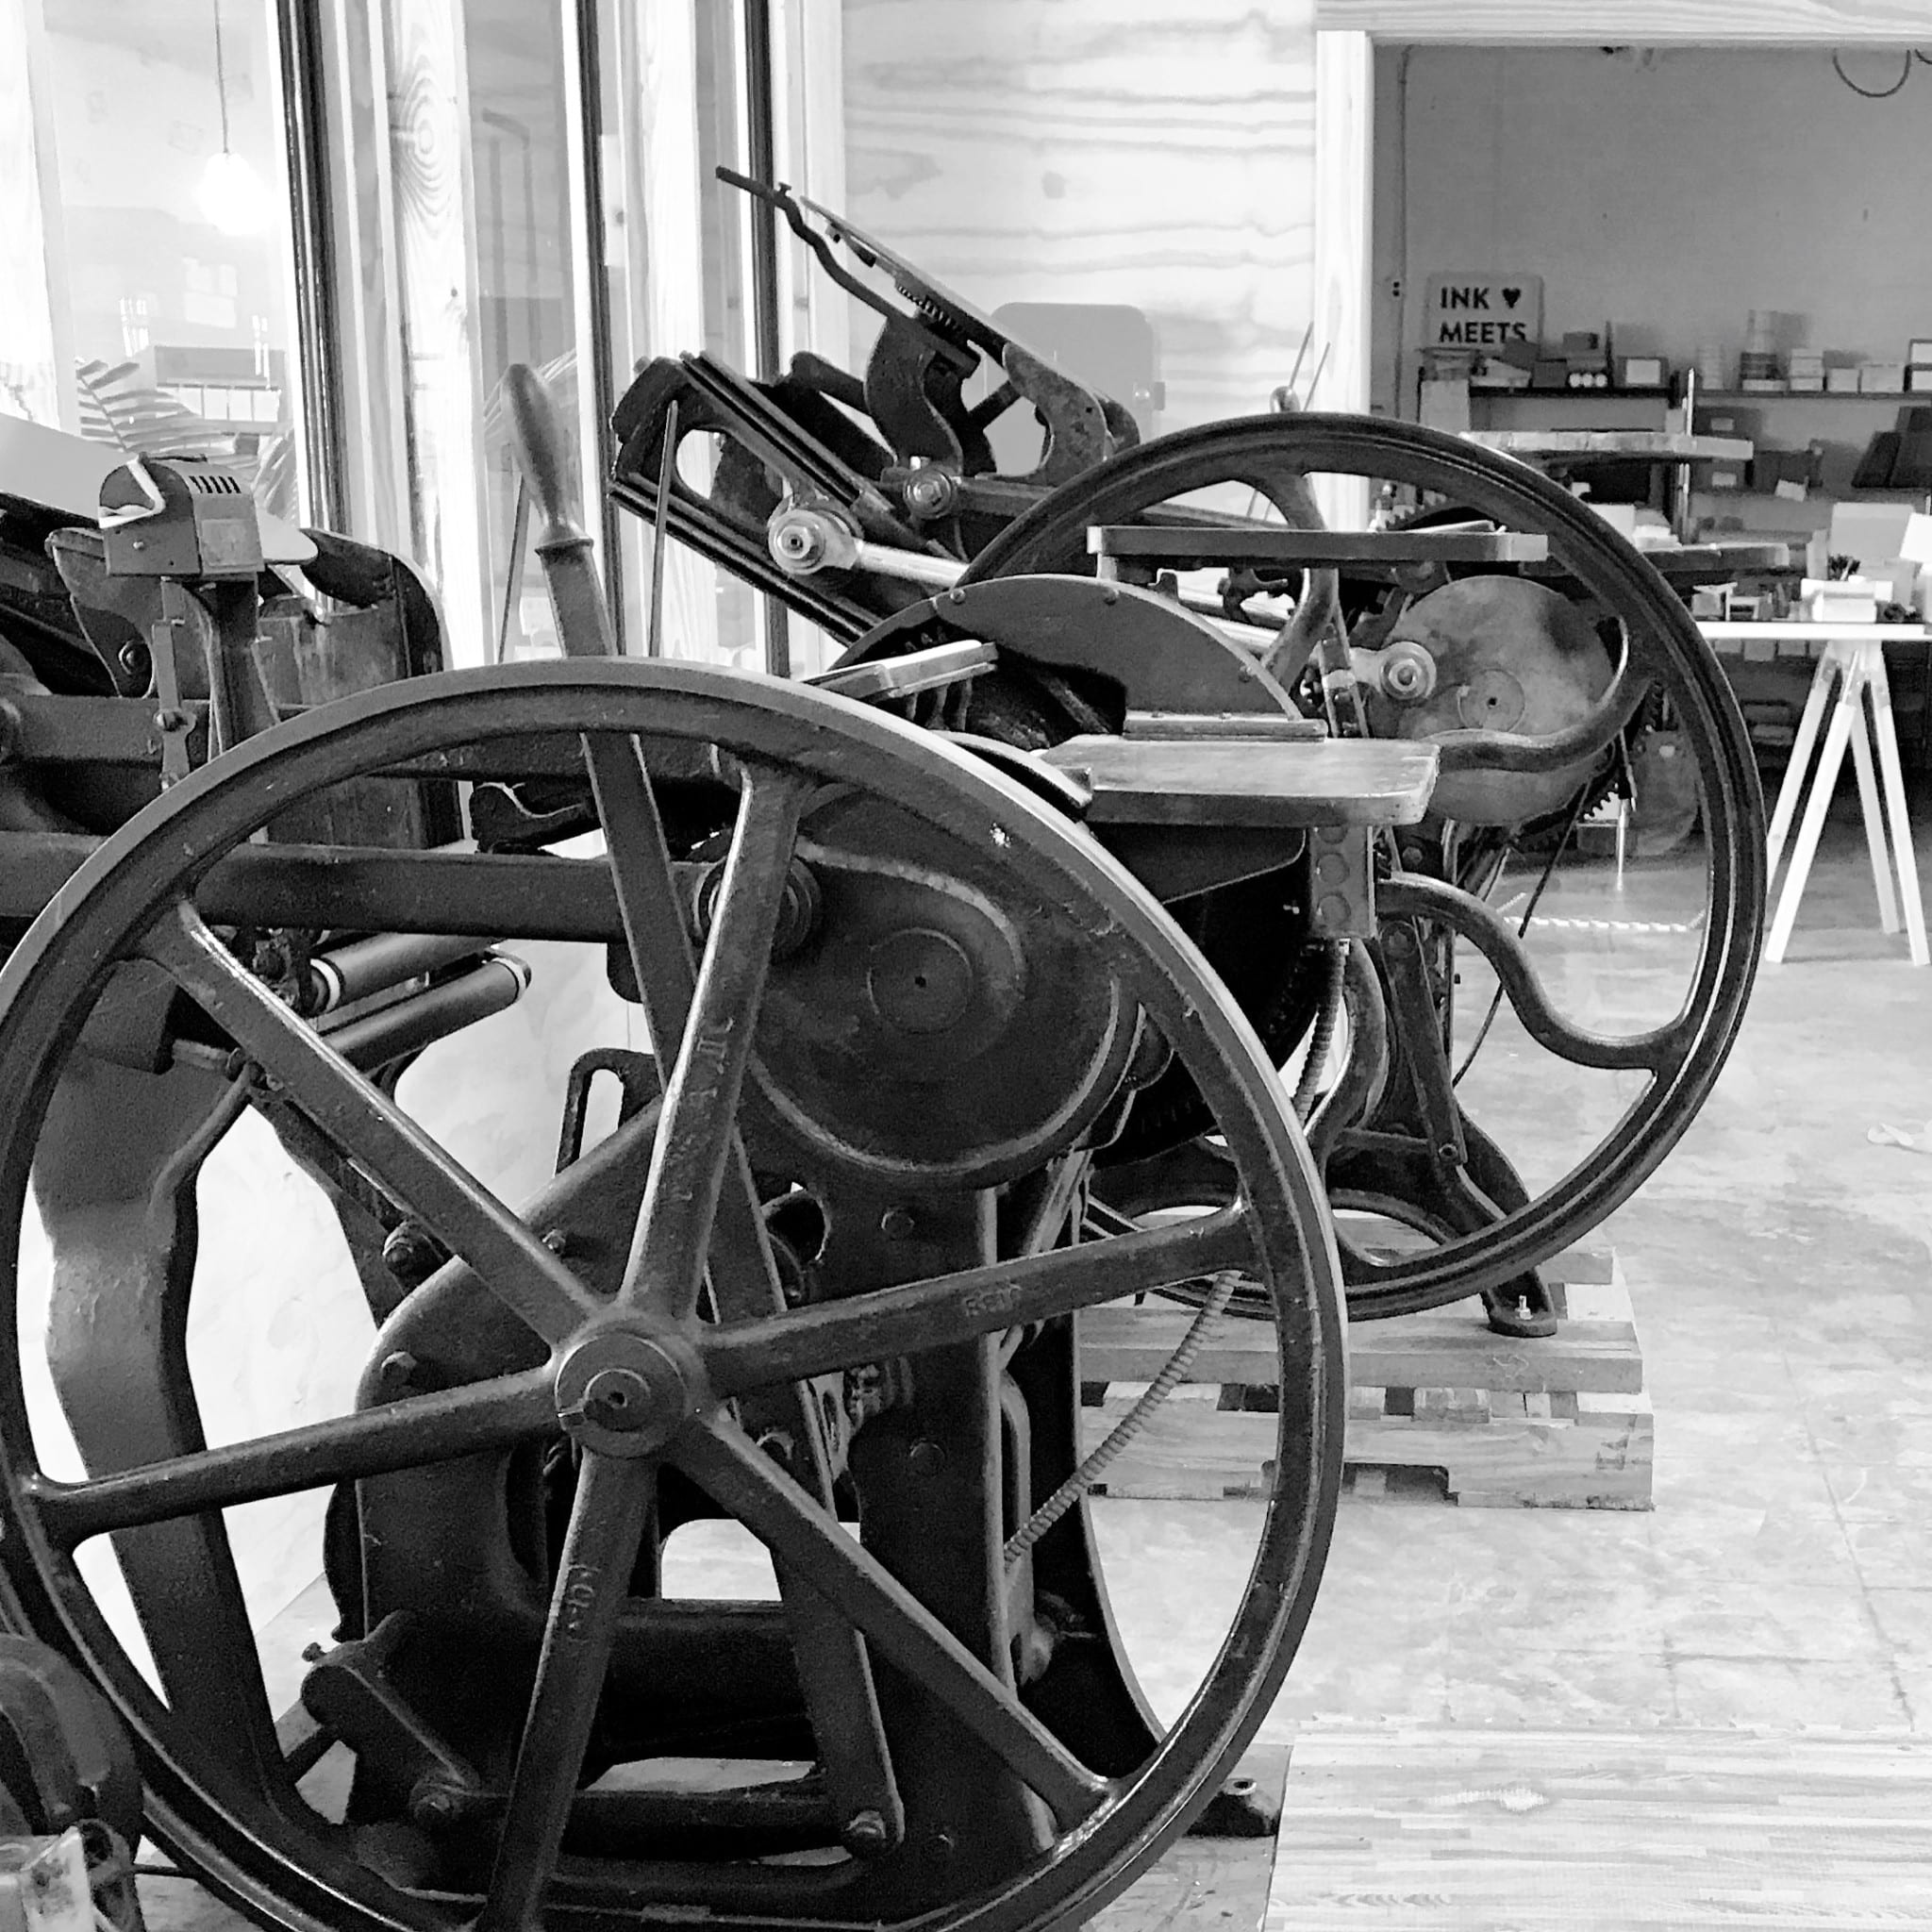 Black & white image showing antique printing presses in the press room at the studio.